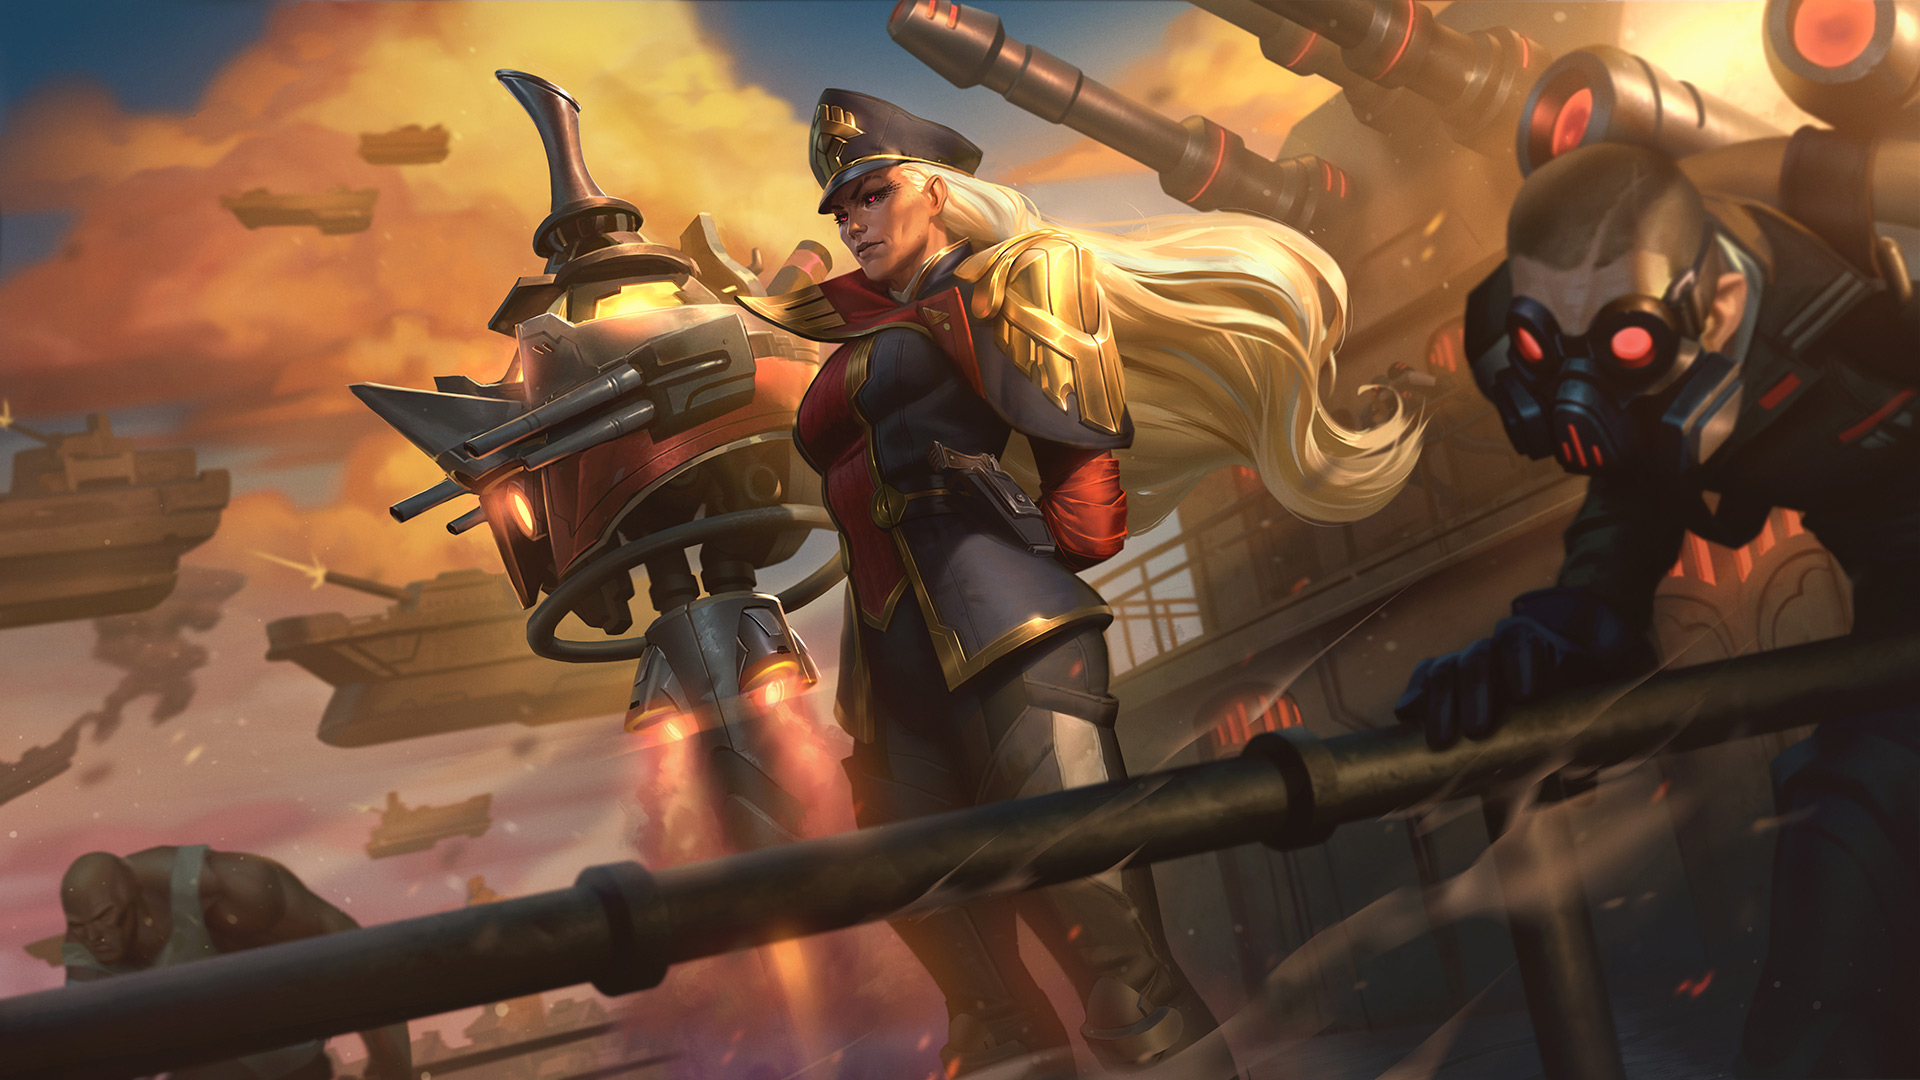 20 Renata Glasc League Of Legends Hd Wallpapers And Backgrounds 